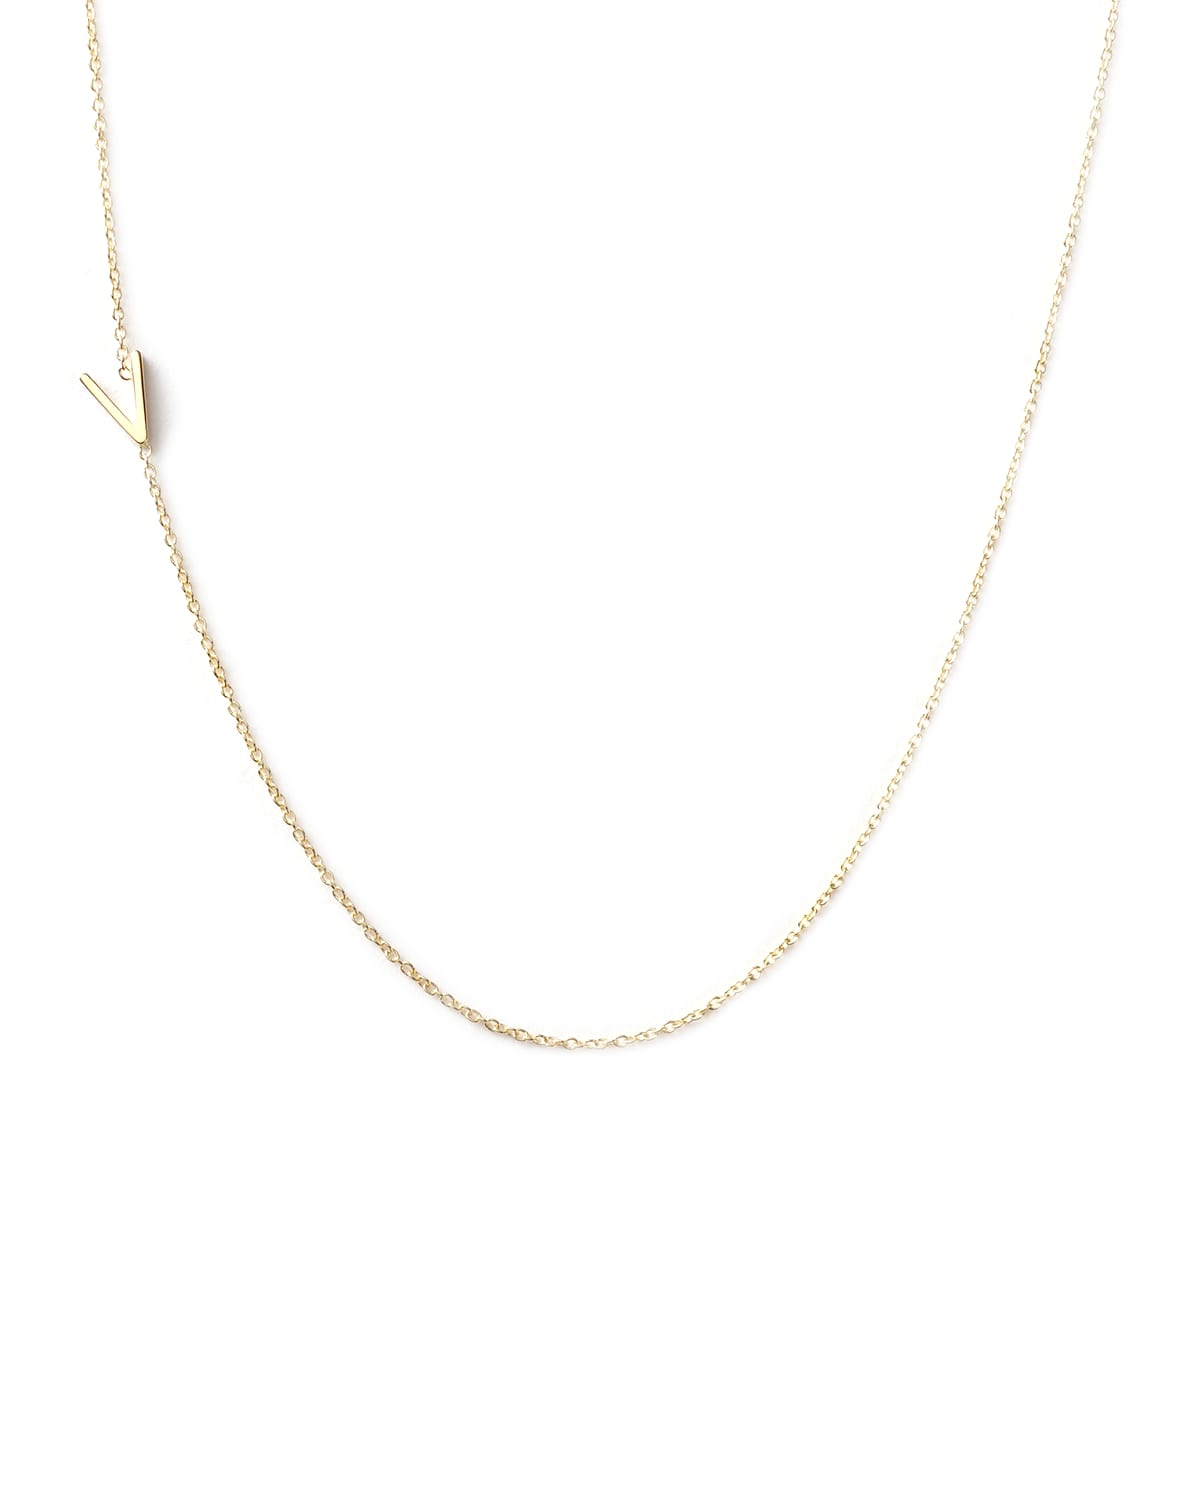 Maya Brenner Designs 14k Yellow Gold Mini Letter Necklace